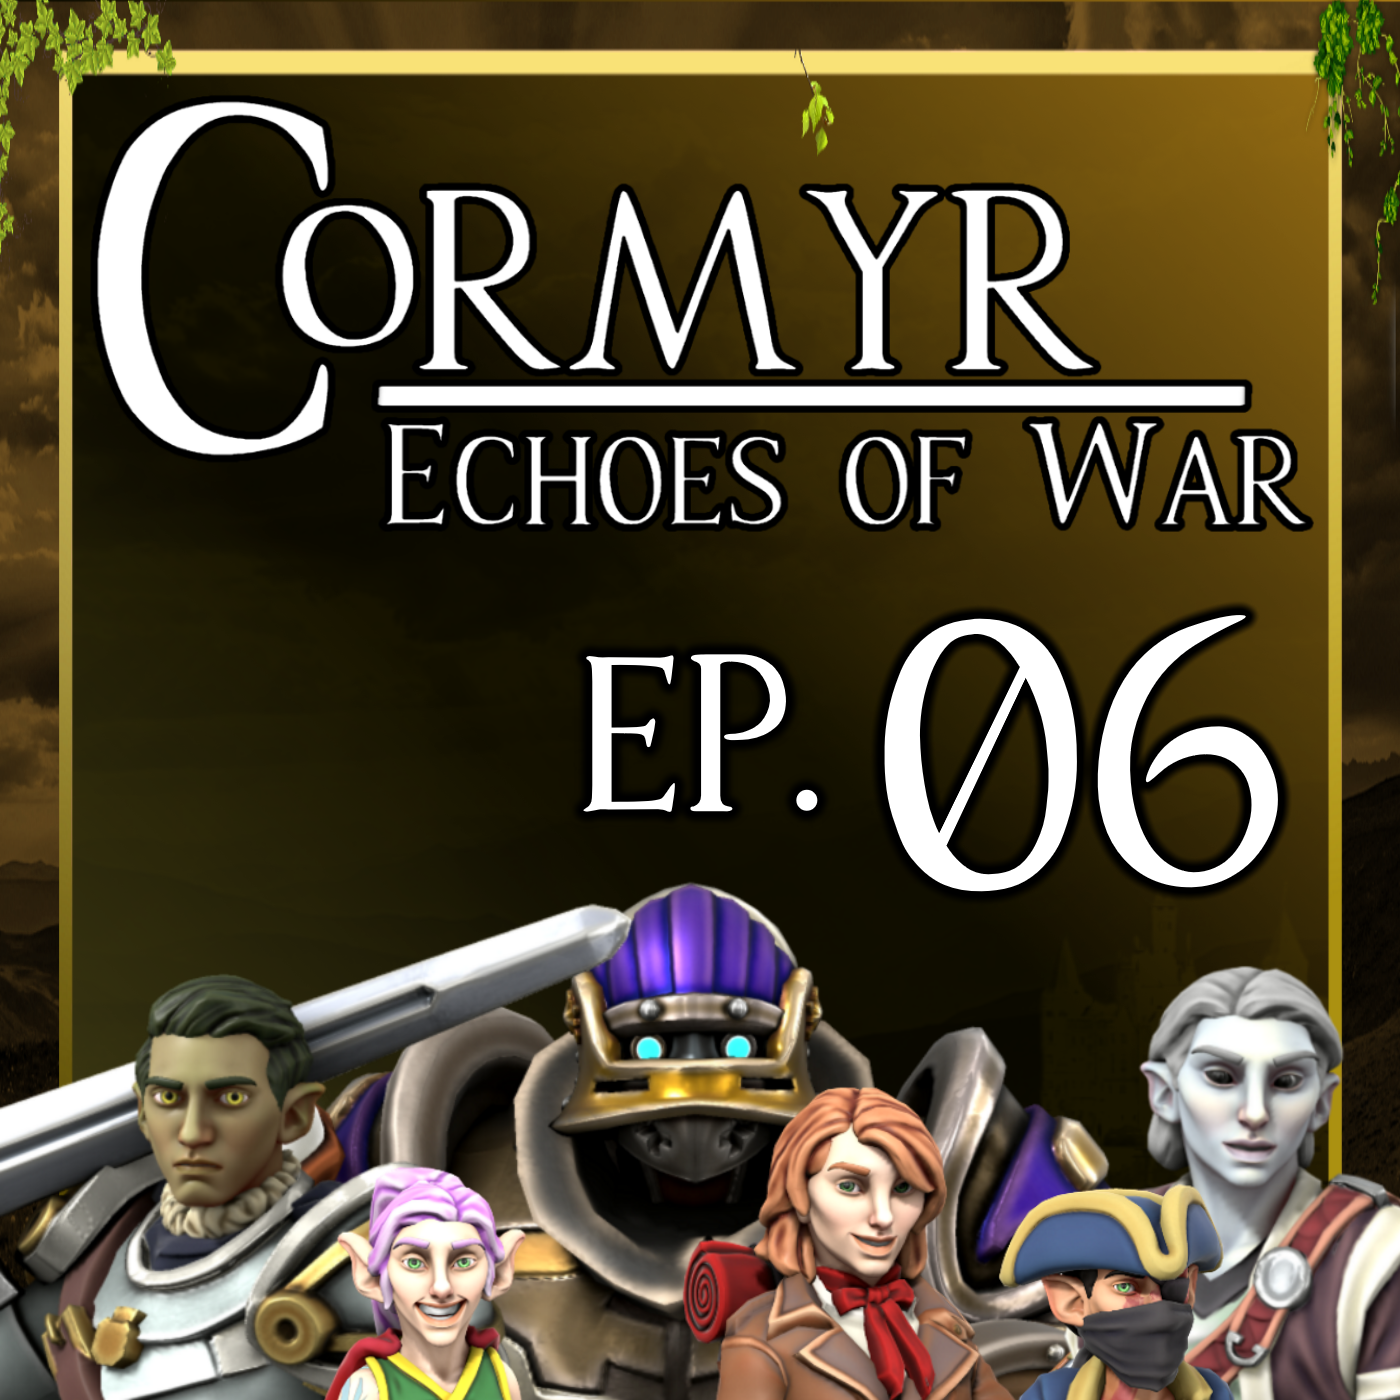 Cormyr: Echoes of War - Ep. 6 - Riddles in the Dark